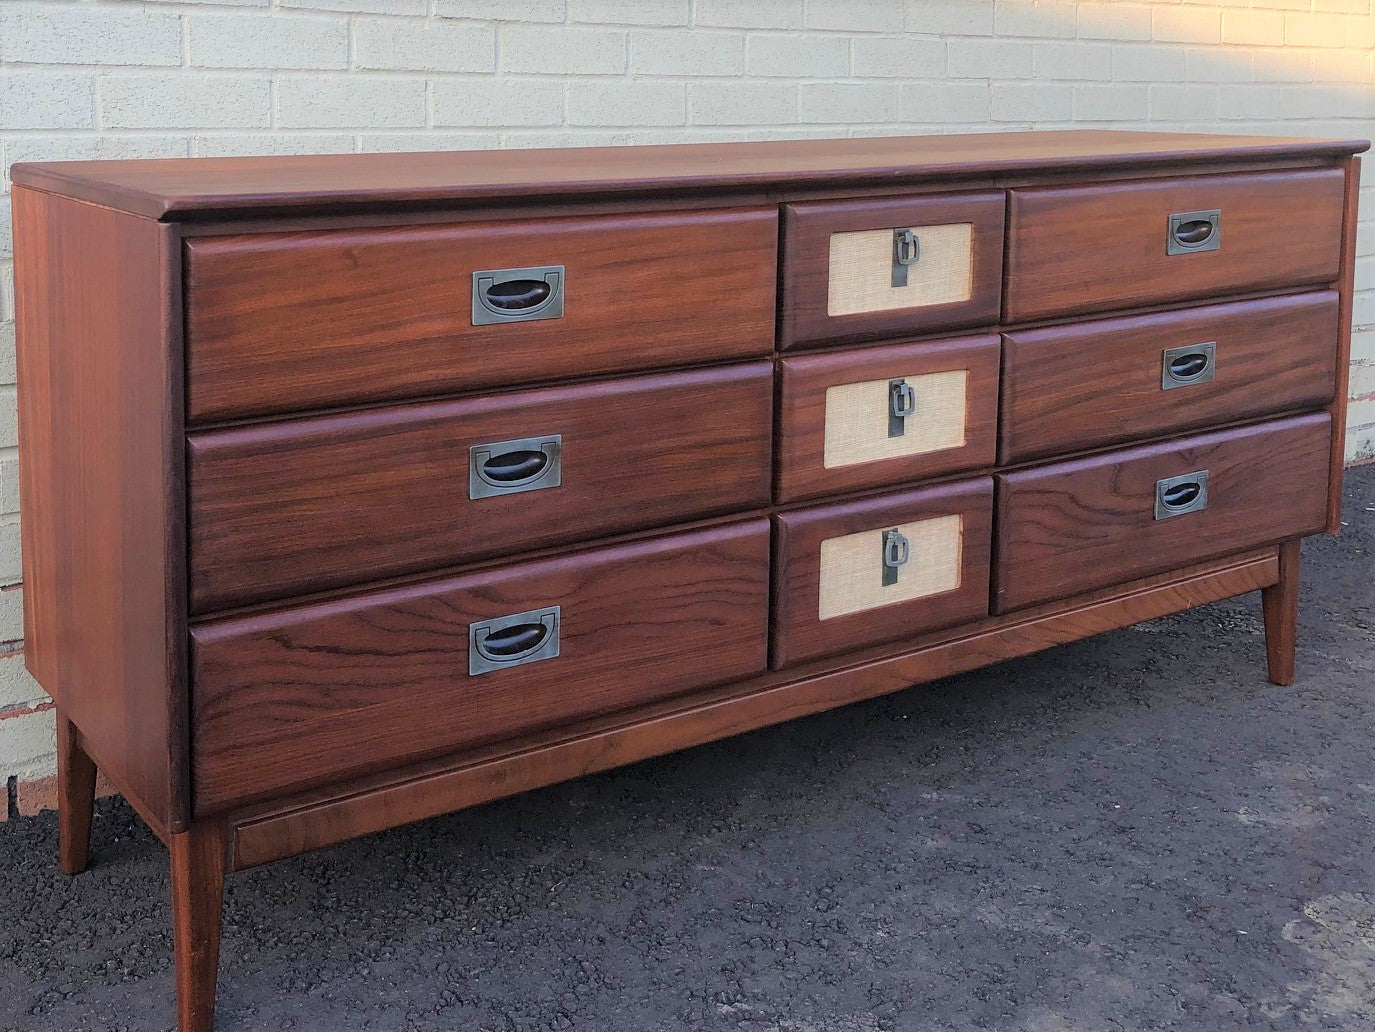 REFINISHED MCM  SOLID TEAK Compact Wardrobe and 9 Drawers Dresser by Imperial, PERFECT - Mid Century Modern Toronto